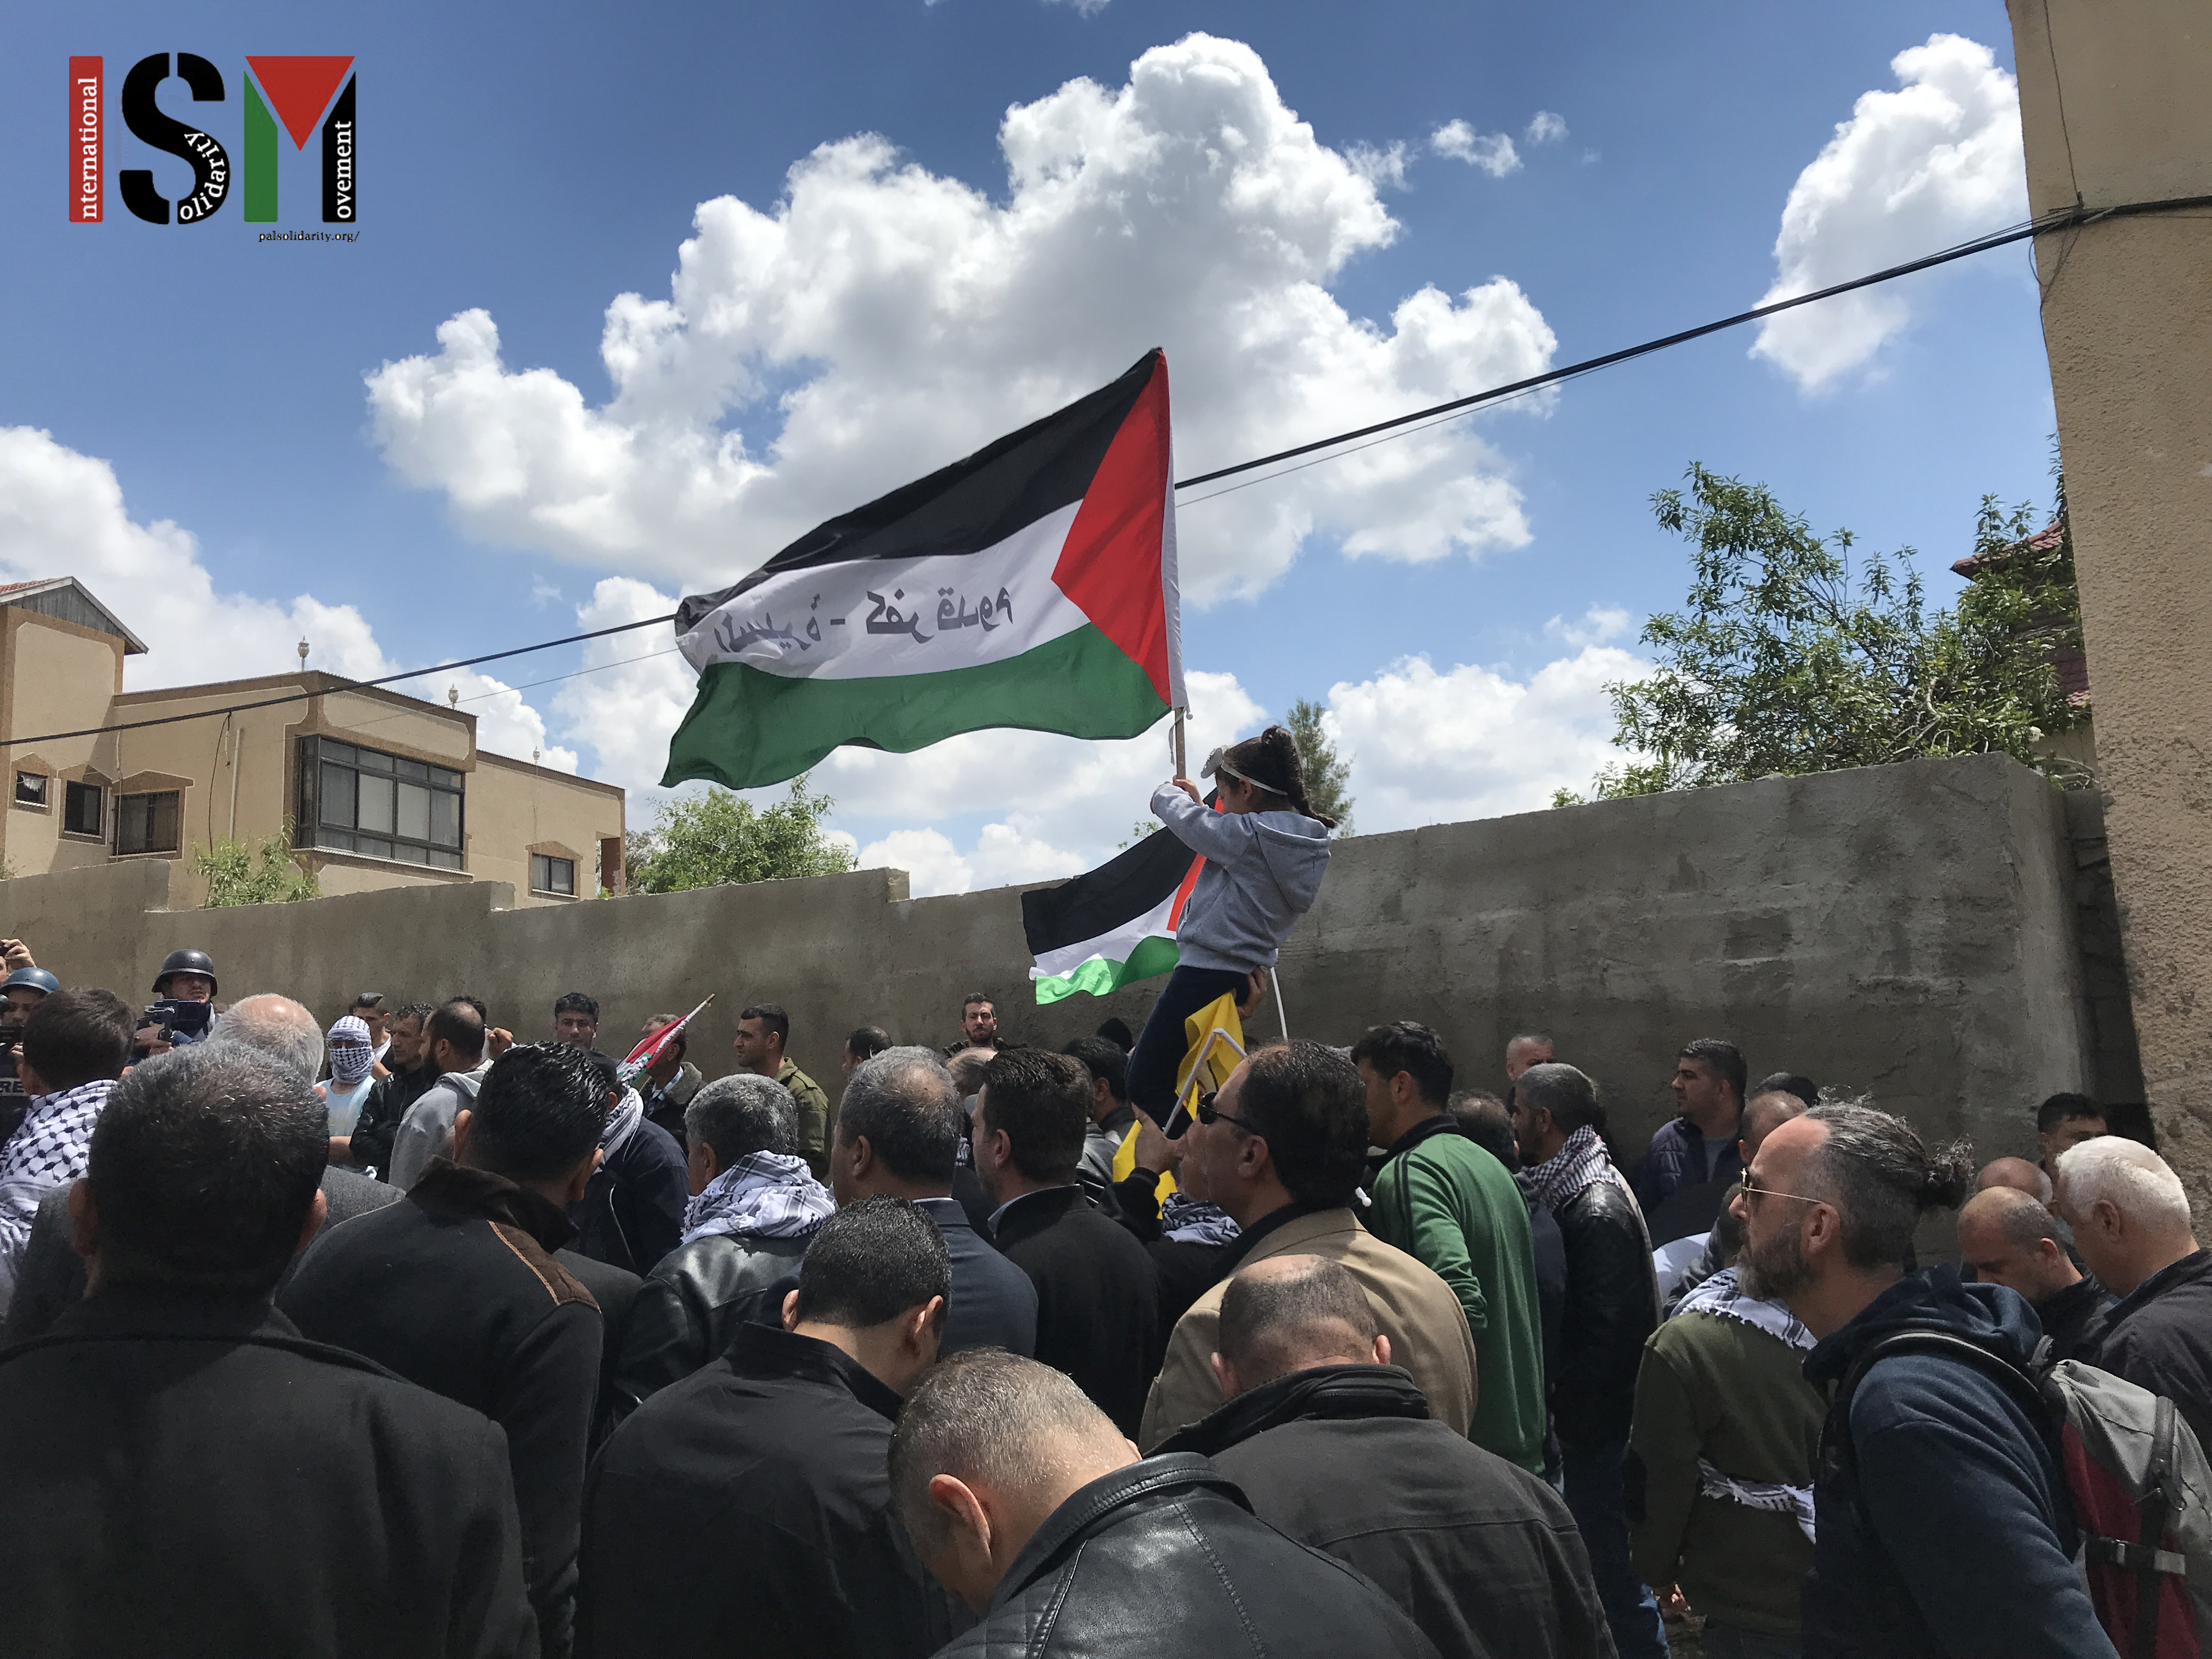 Protesters gather, a Palestinian flag flying, little girl on her fathers shoulders.